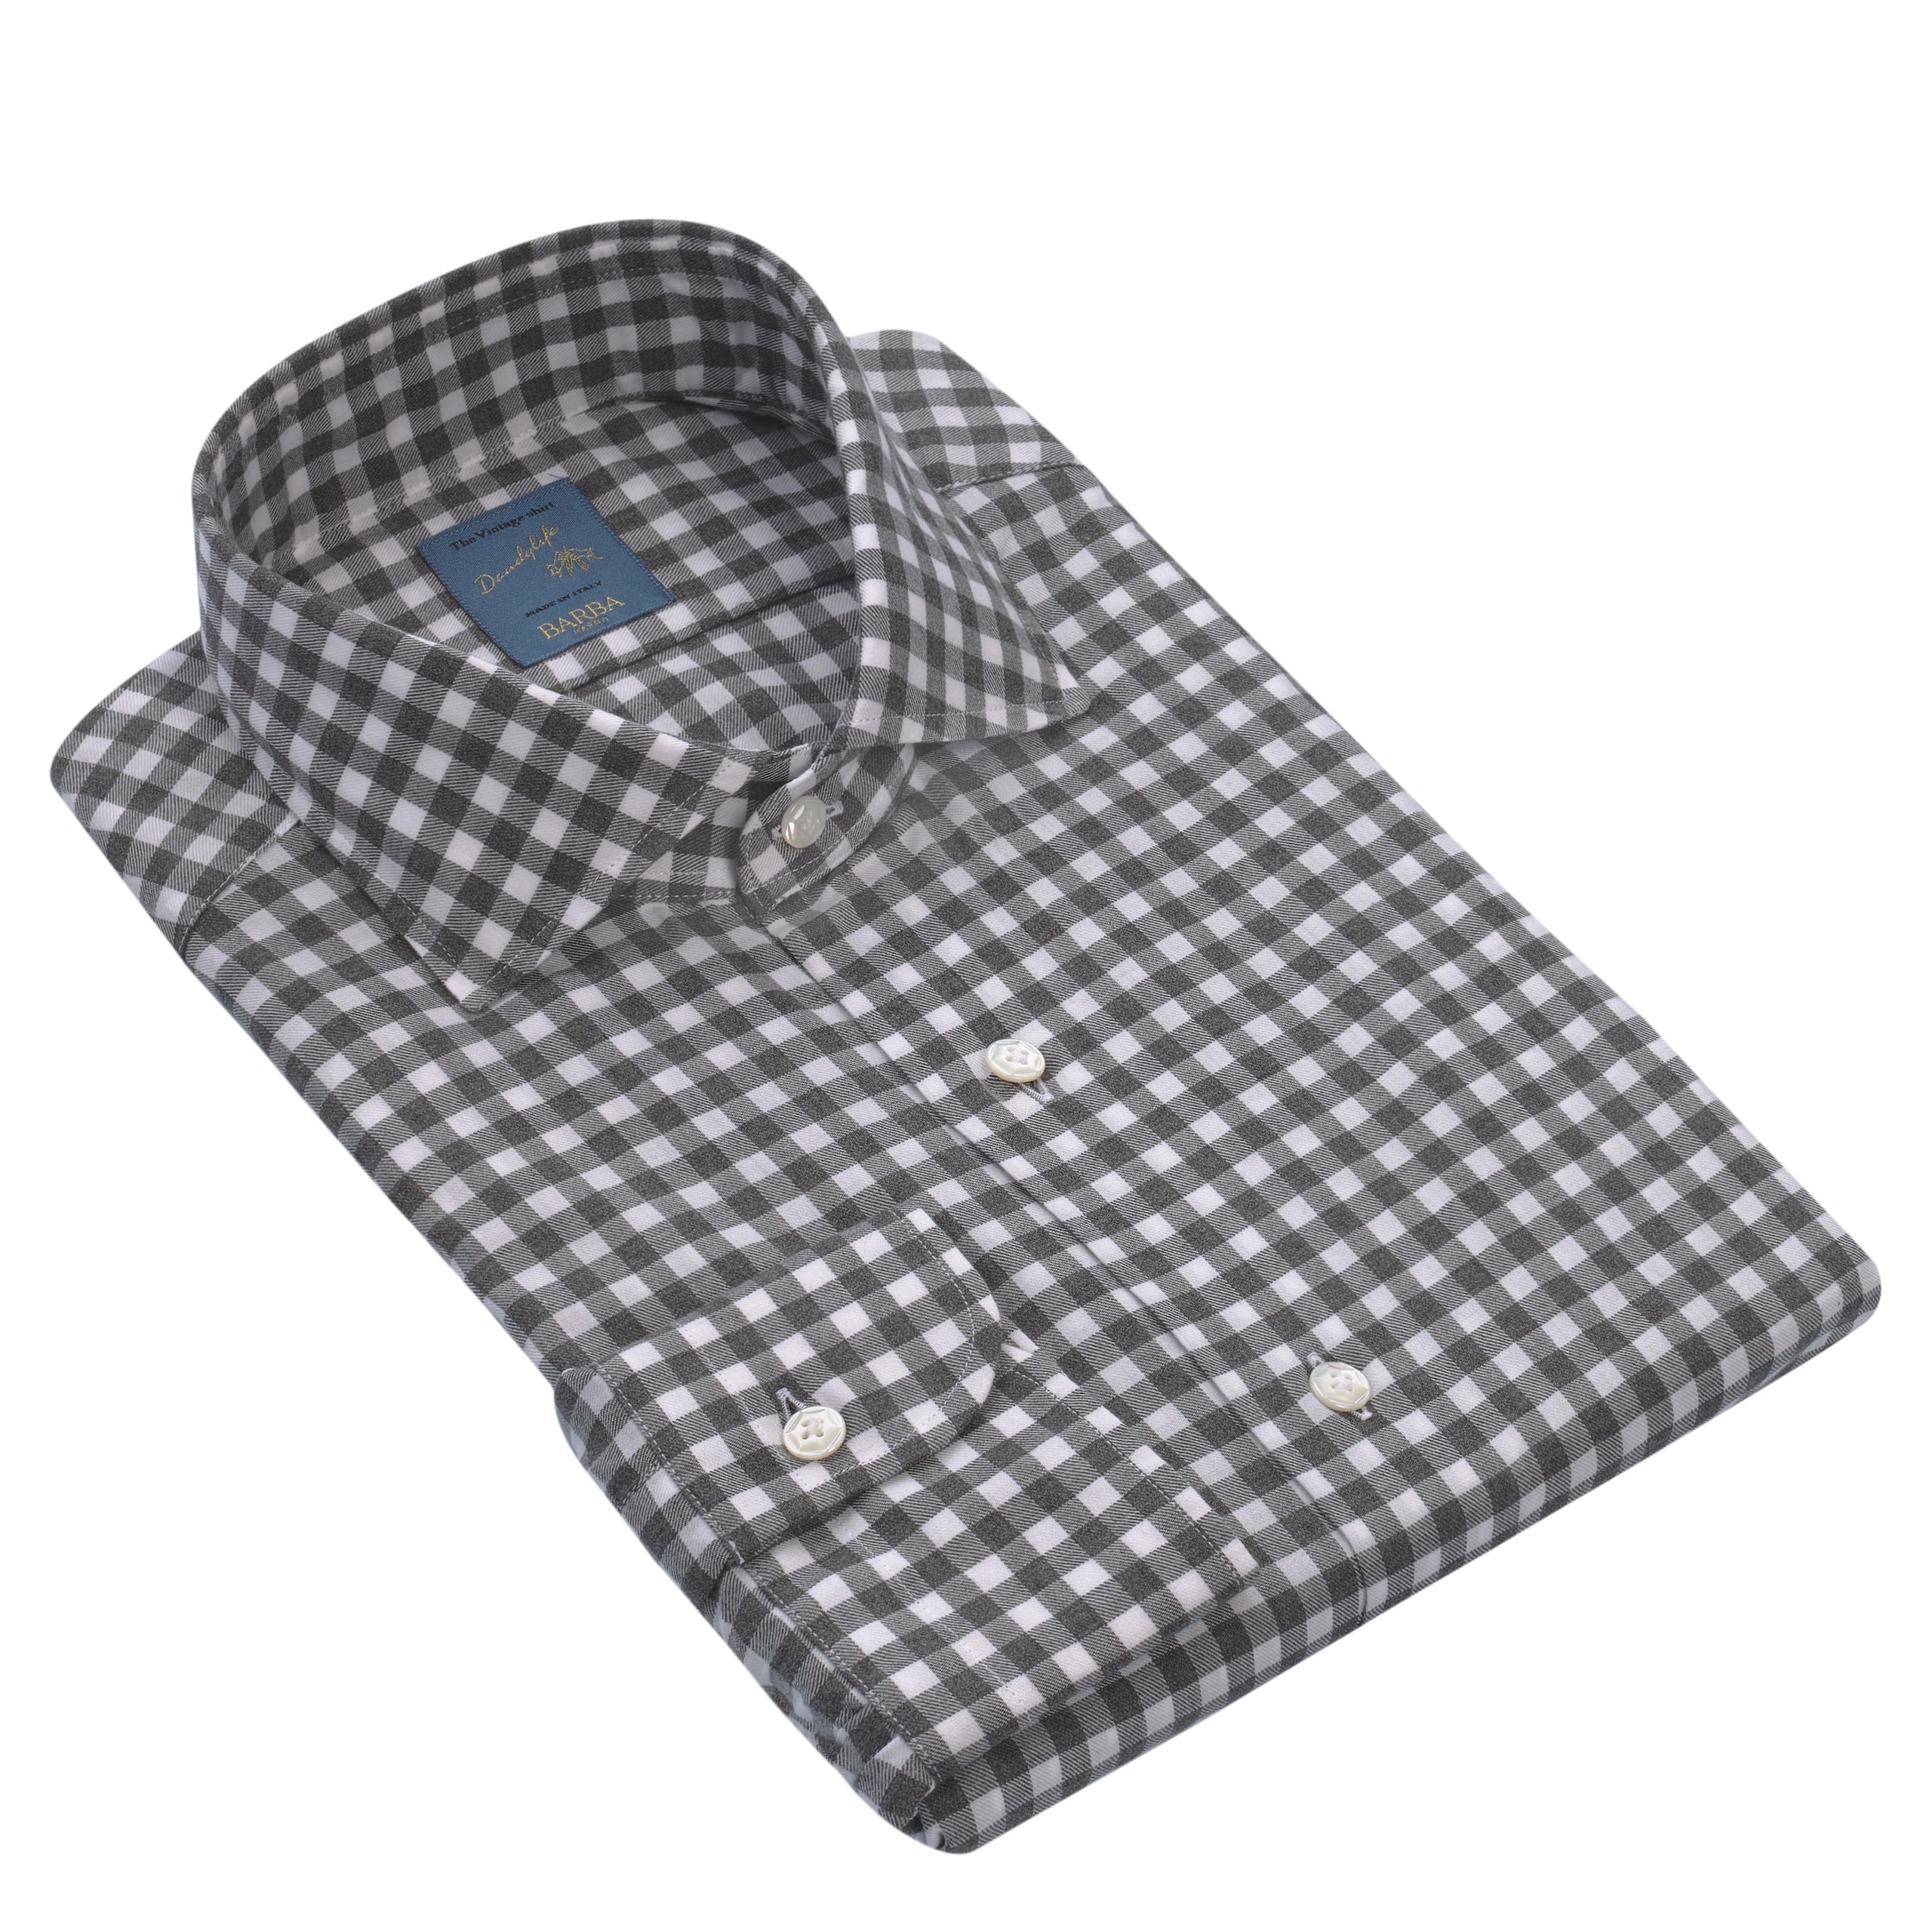 "Dandy Life" Gingham-Check Cotton Shirt in Grey and White